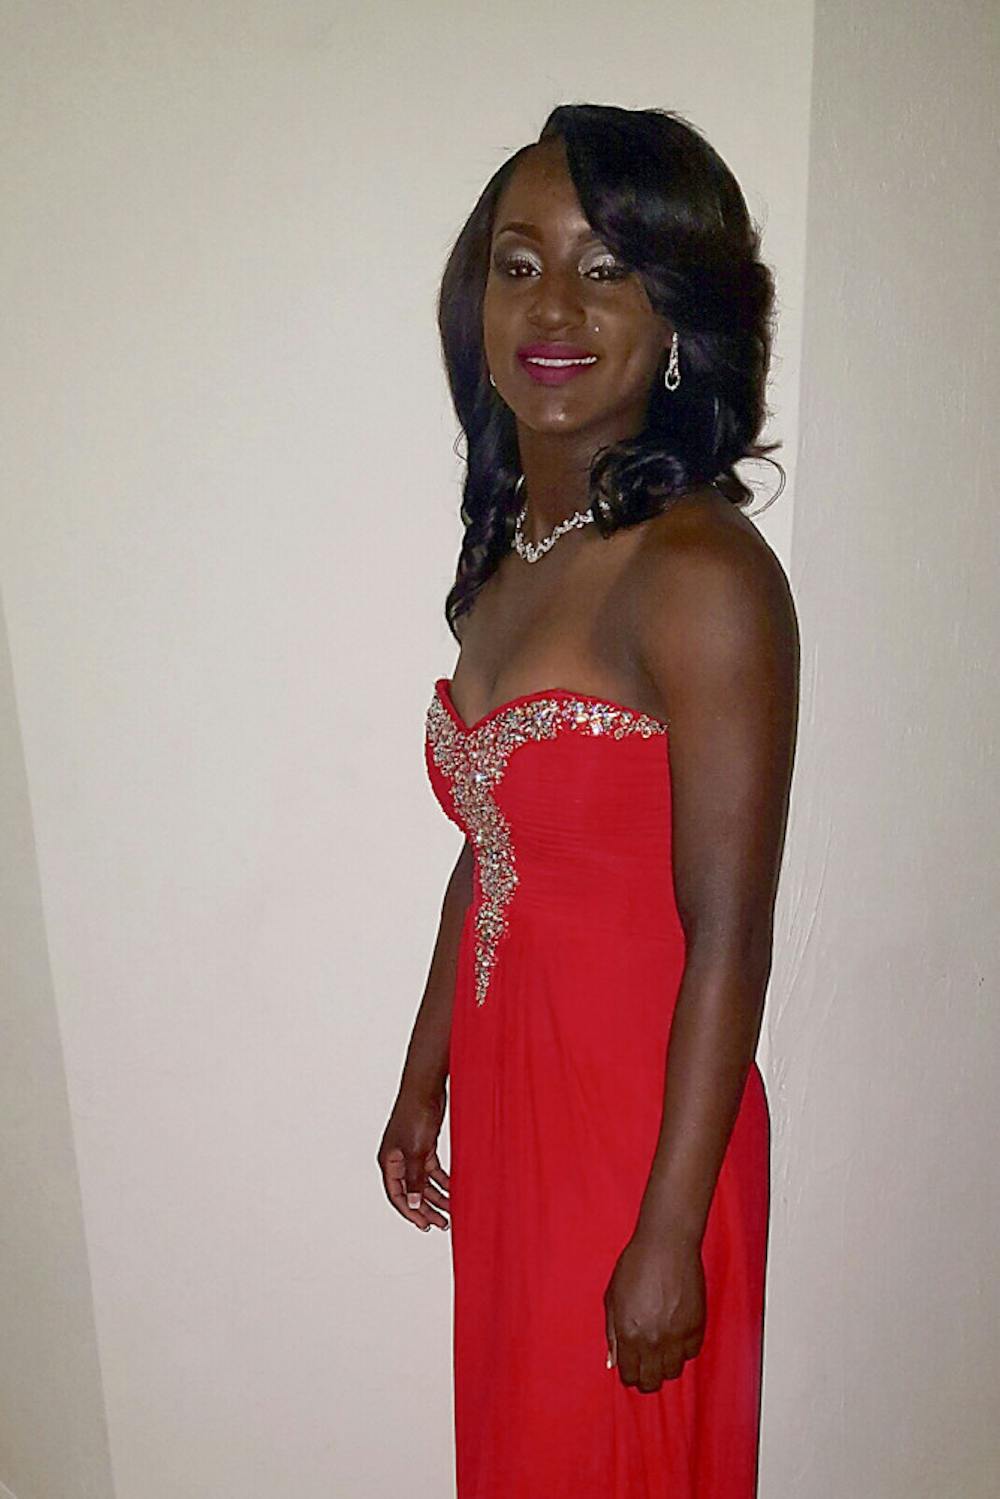 <p>Eastside High School junior Naiesha Baker poses for a photo with the outfit she won from the Being Fab for Prom giveaway, which was started by UF alumnae Gabrielle Burch and Brooke Cantrell. “At first I thought it was fake that I had won. I had to ask my mom if this was for real,” she said.</p>